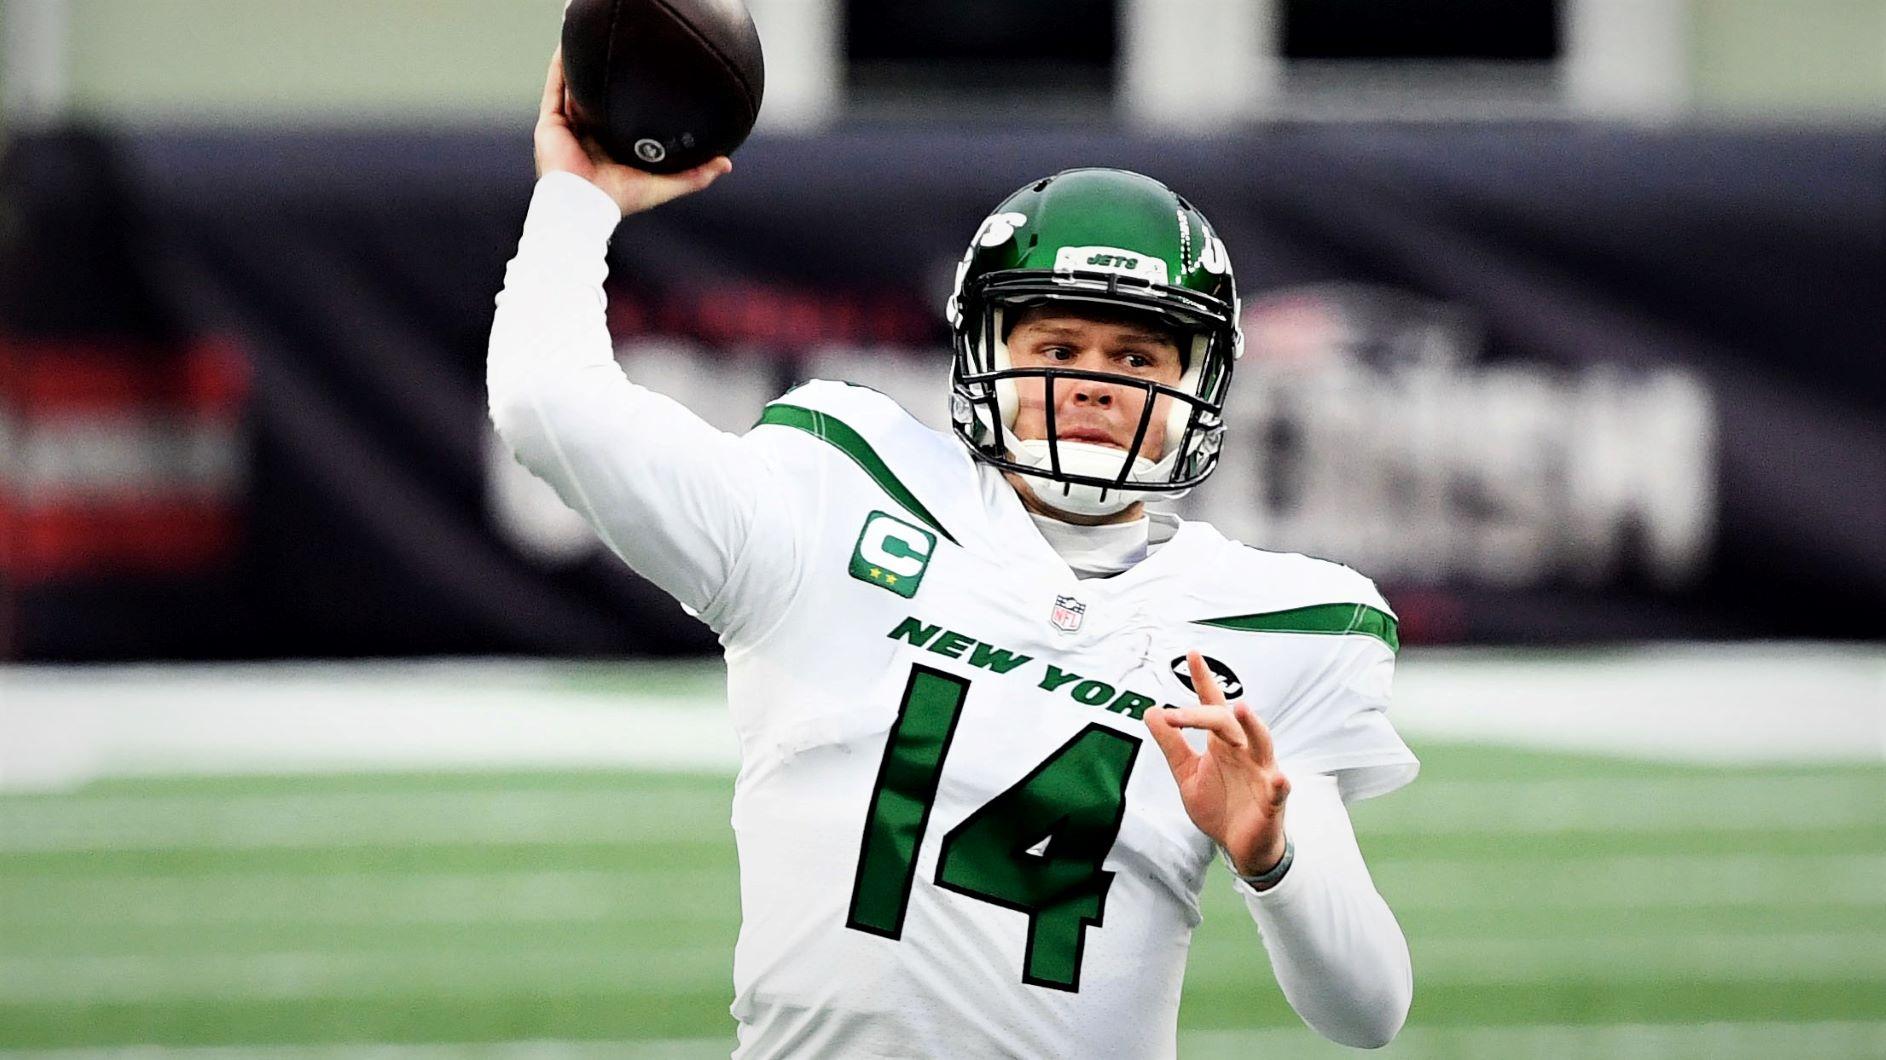 Jan 3, 2021; Foxborough, Massachusetts, USA; New York Jets quarterback Sam Darnold (14) throws the ball against the New England Patriots during the second quarter at Gillette Stadium. Mandatory Credit: Brian Fluharty-USA TODAY Sports / © Brian Fluharty-USA TODAY Sports